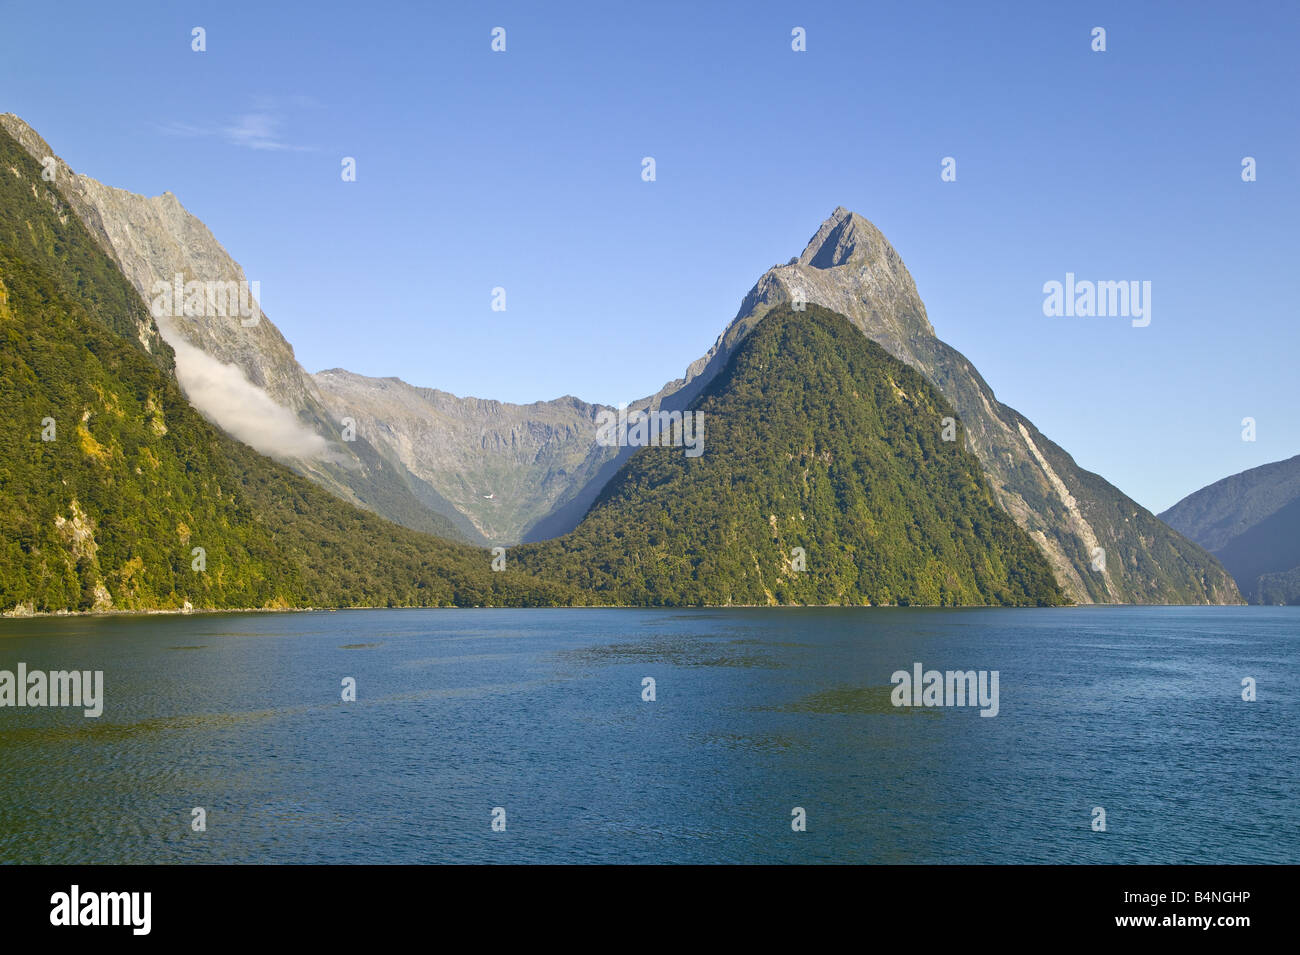 Mitre Peak, Milford Sound, South Island, New Zealand with inland valley showing under a blue sky. Stock Photo